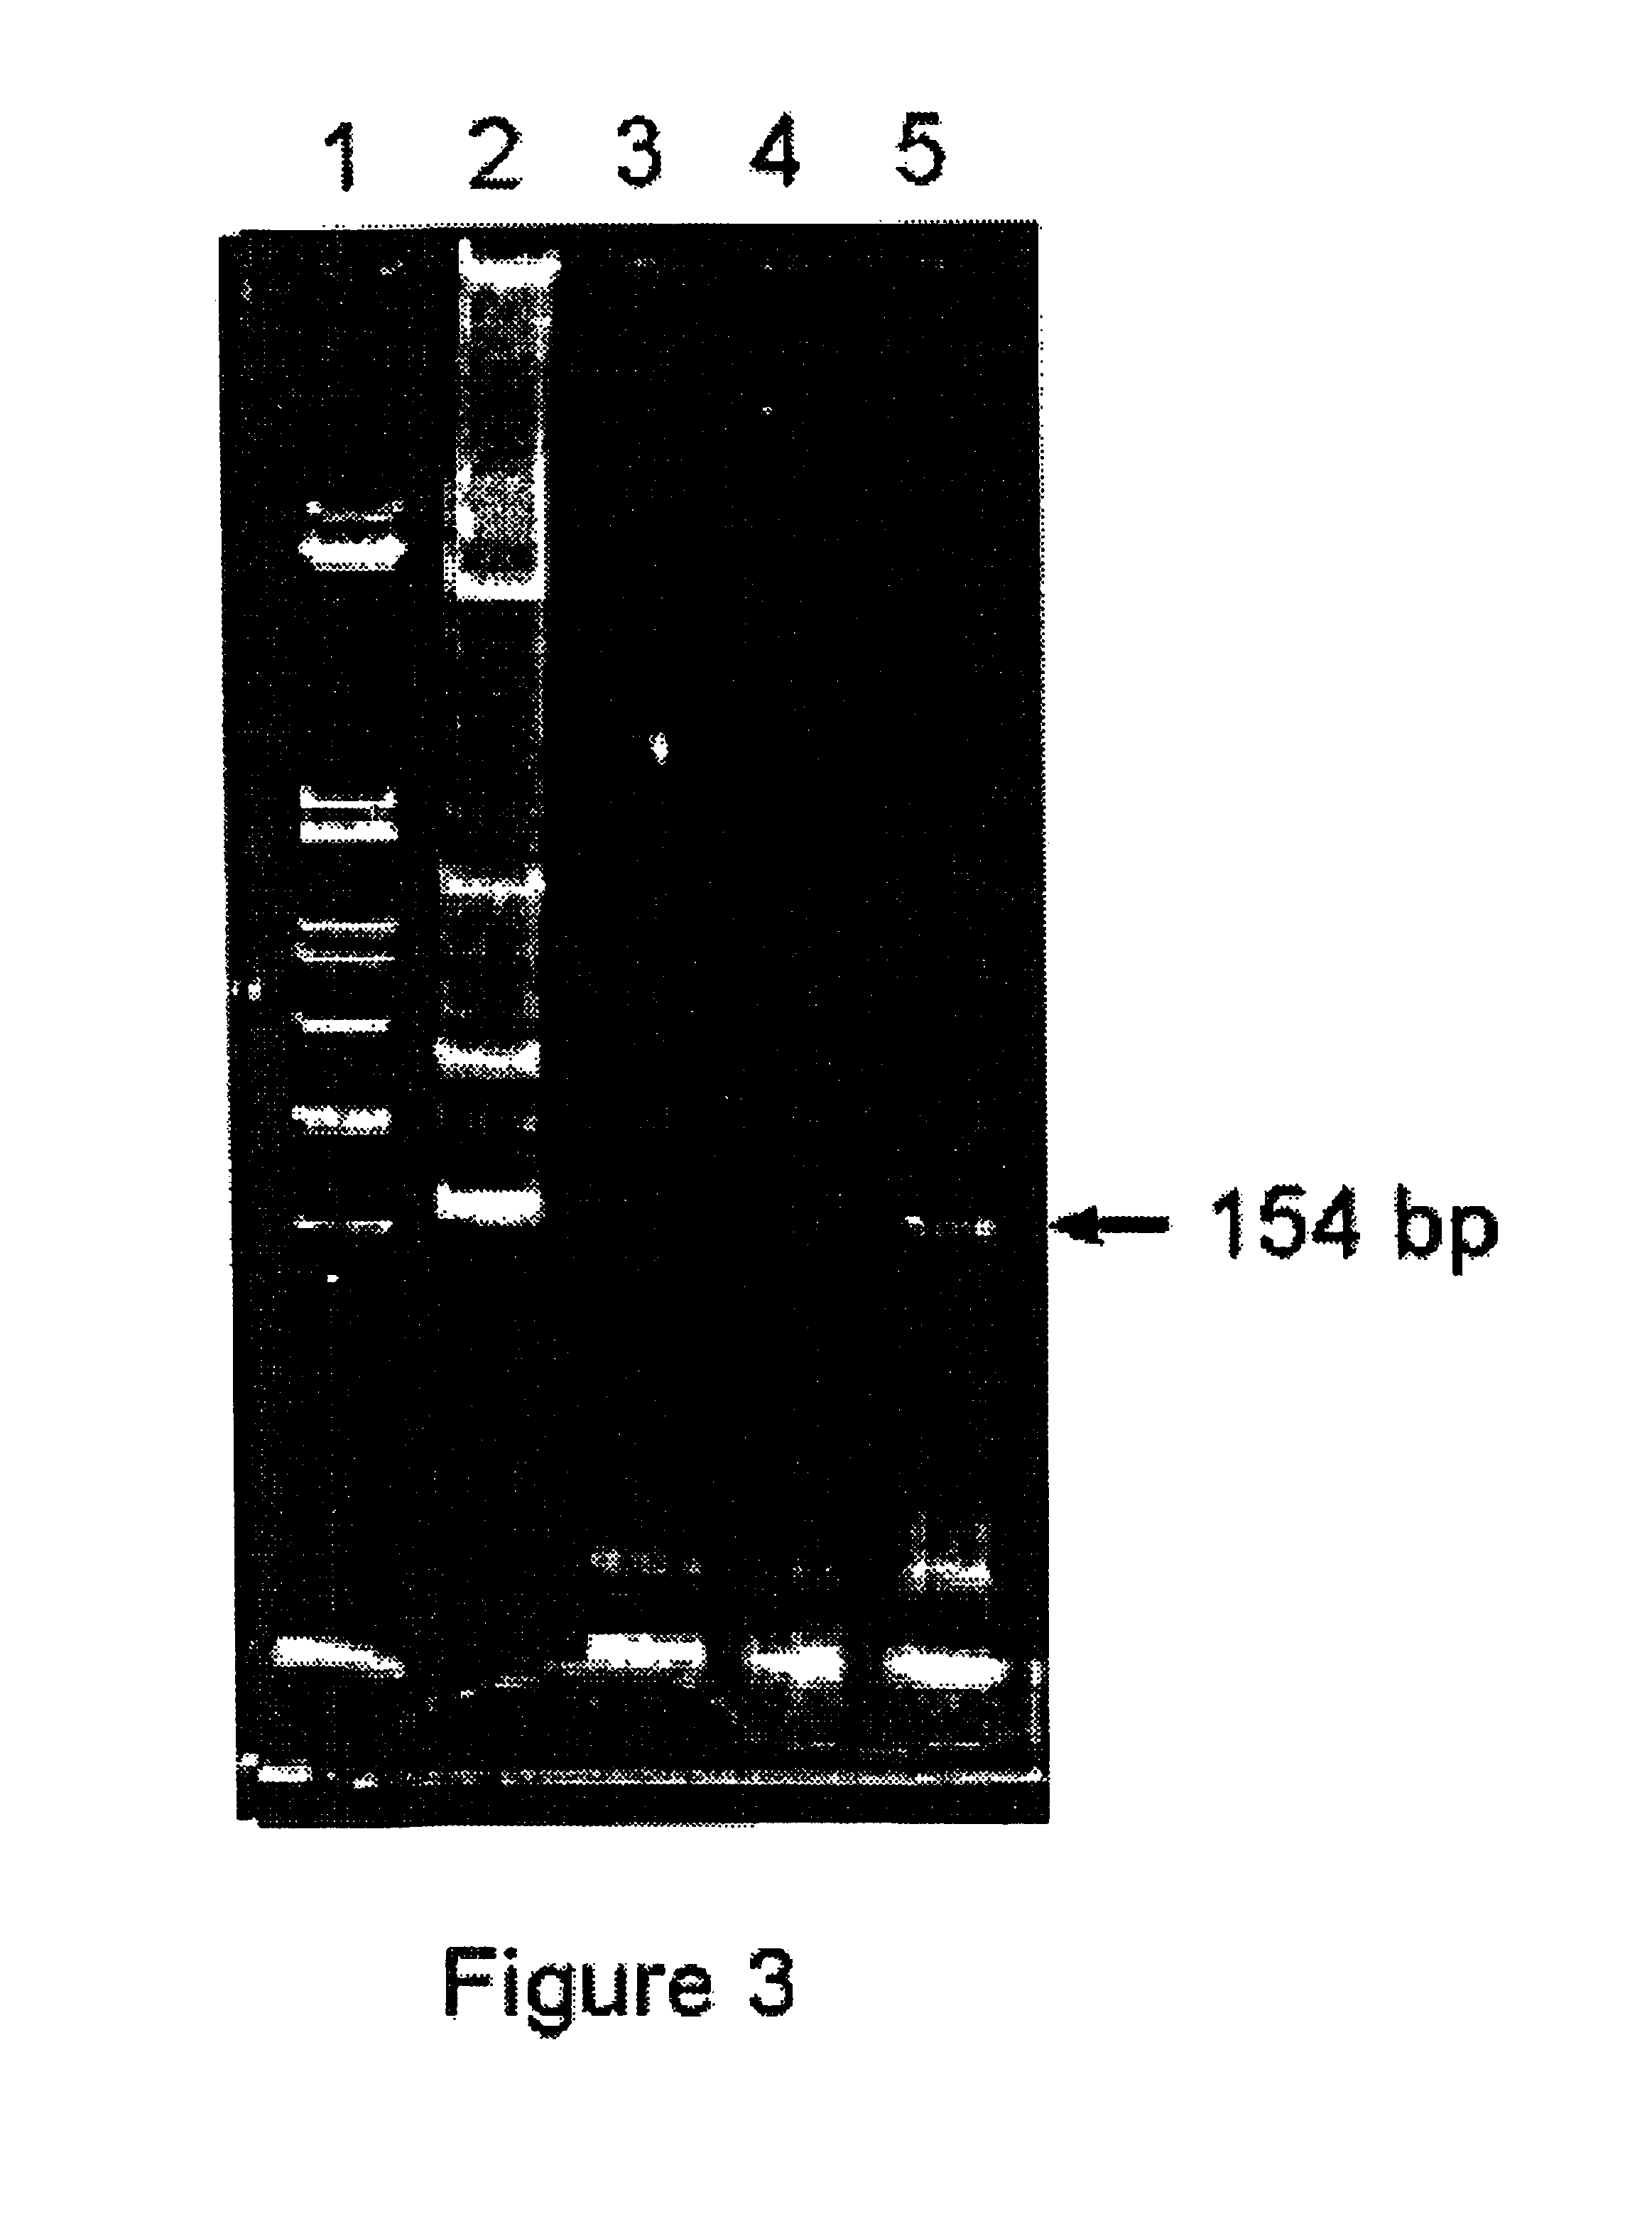 Methods for detection of nucleic acid sequences in urine